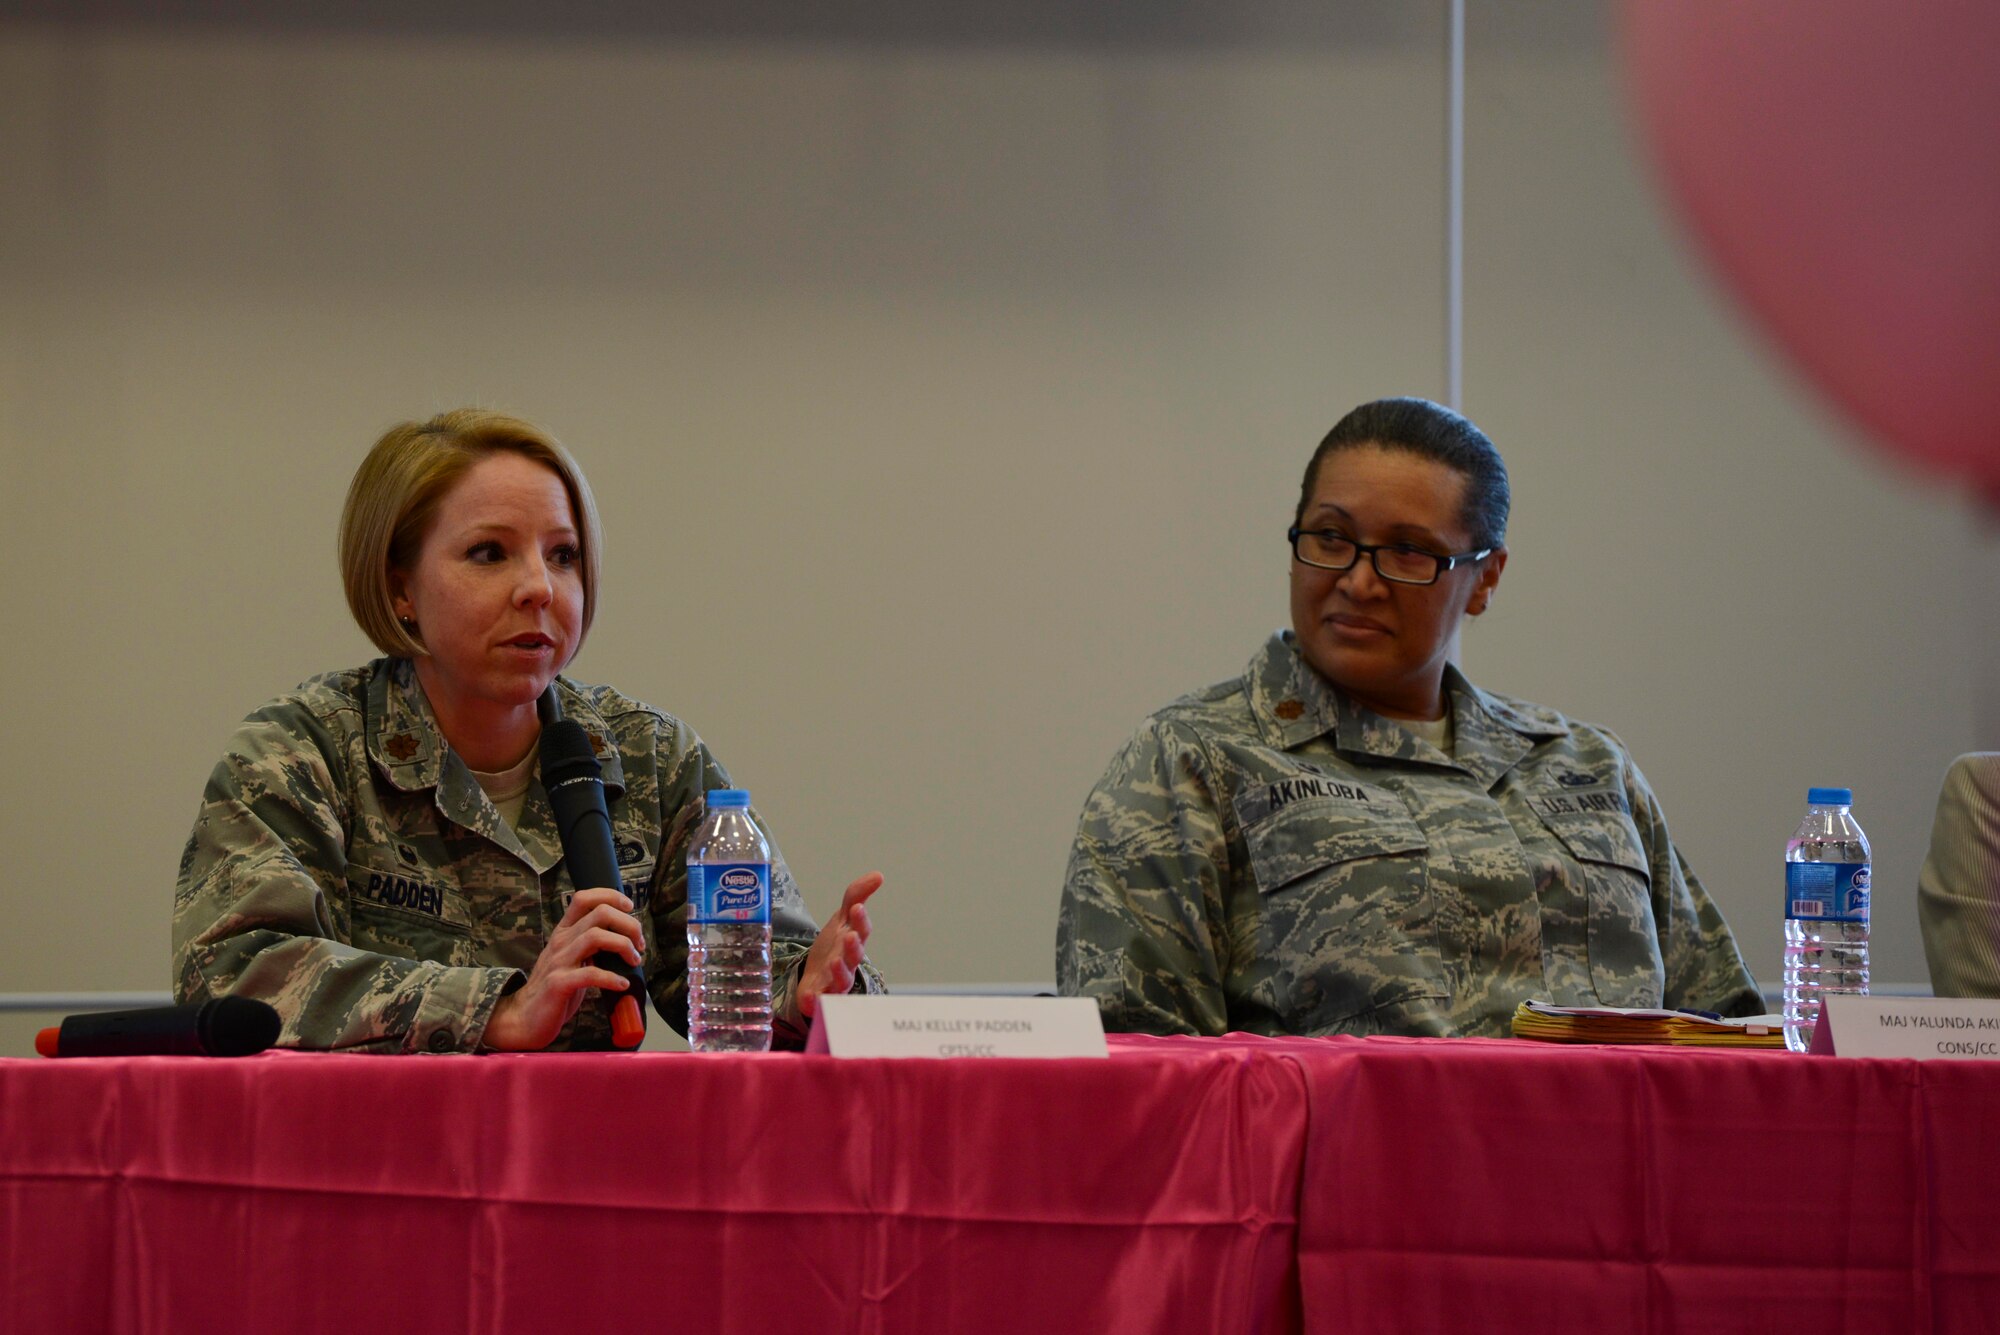 U.S. Air Force Maj. Kelly Padden (left), 39th Comptroller Squadron commander, and Maj. Yalunda Akinloba, 39th Contracting Squadron commander, speak at Incirlik’s International Women’s Day lunch and learn event March 8, 2017, at Incirlik Air Base, Turkey. Padden and Akinloba answered questions about how they overcame adversity in their careers. (U.S. Air Force photo by Airman 1st Class Devin M. Rumbaugh)